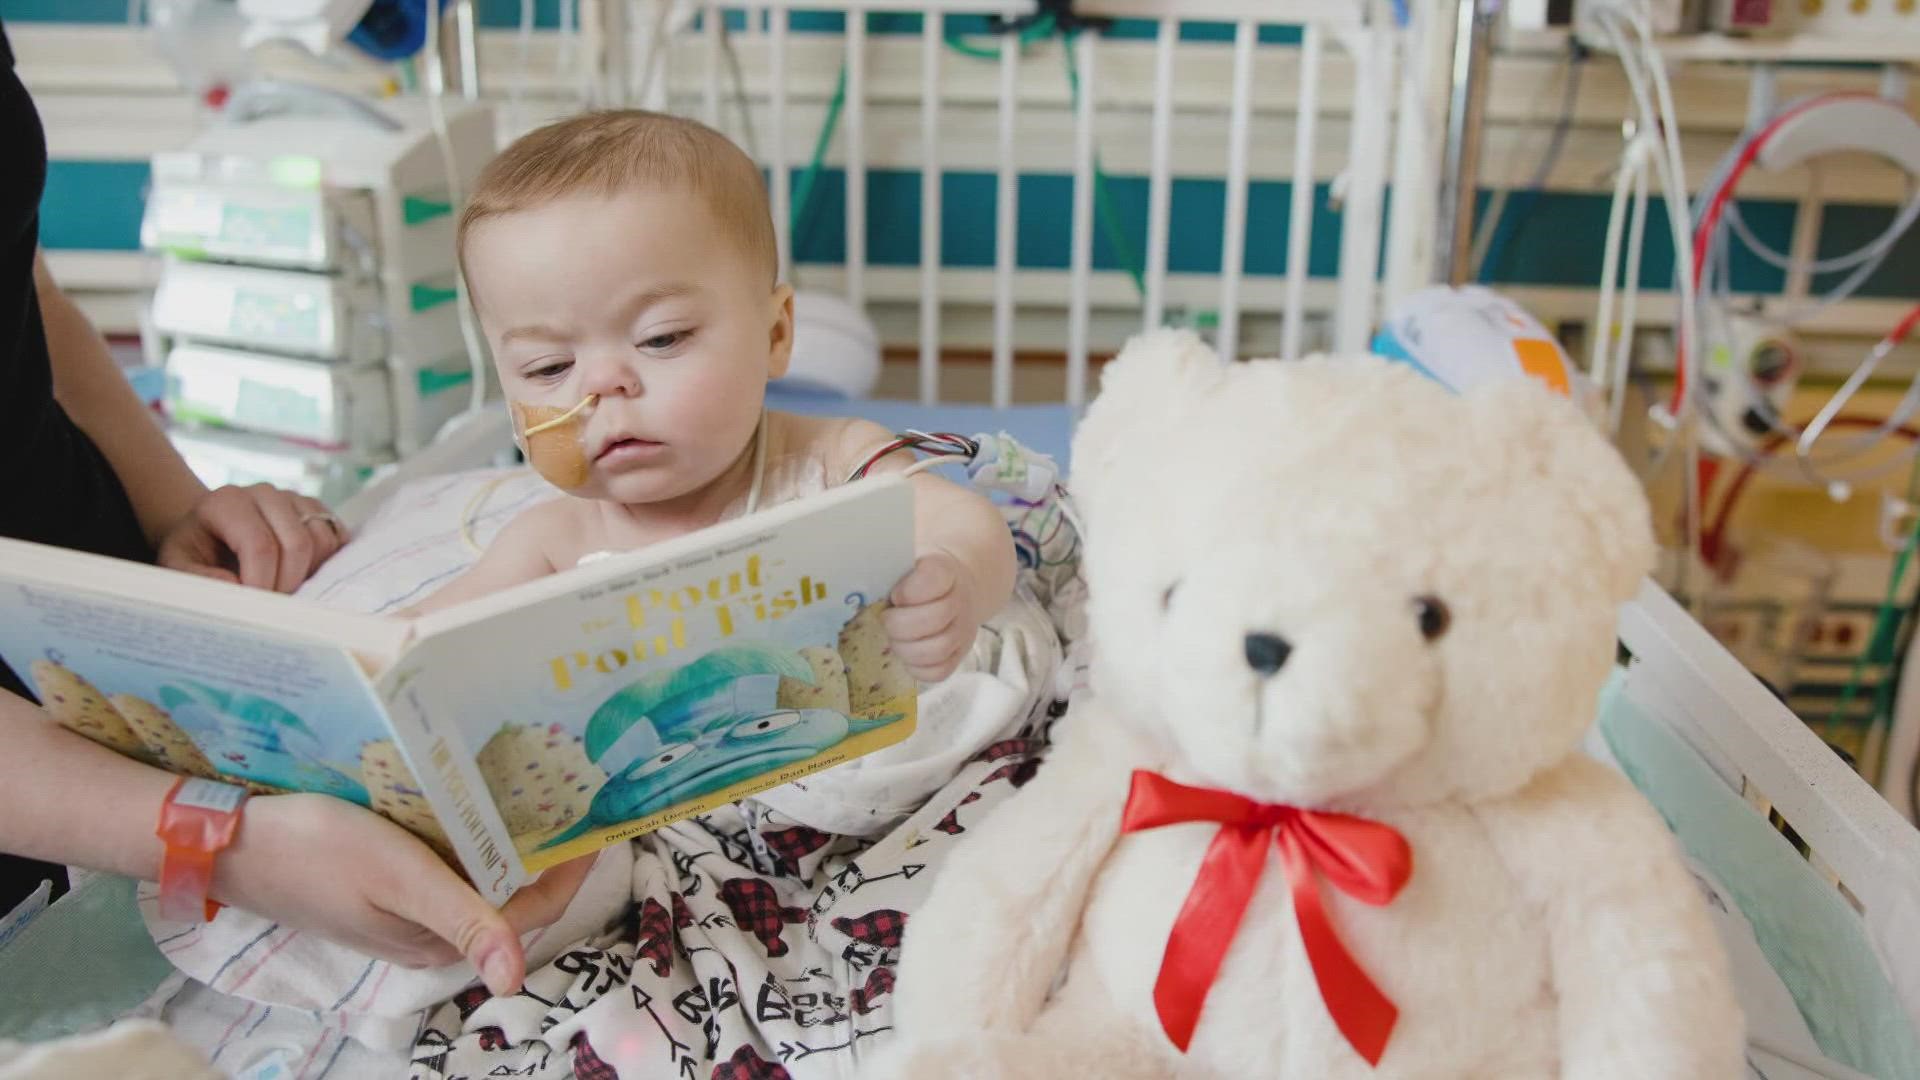 It's Giving Tuesday and many are looking for ways to give back to the community. Here's how people can support the patients of Phoenix Children's Hospital.